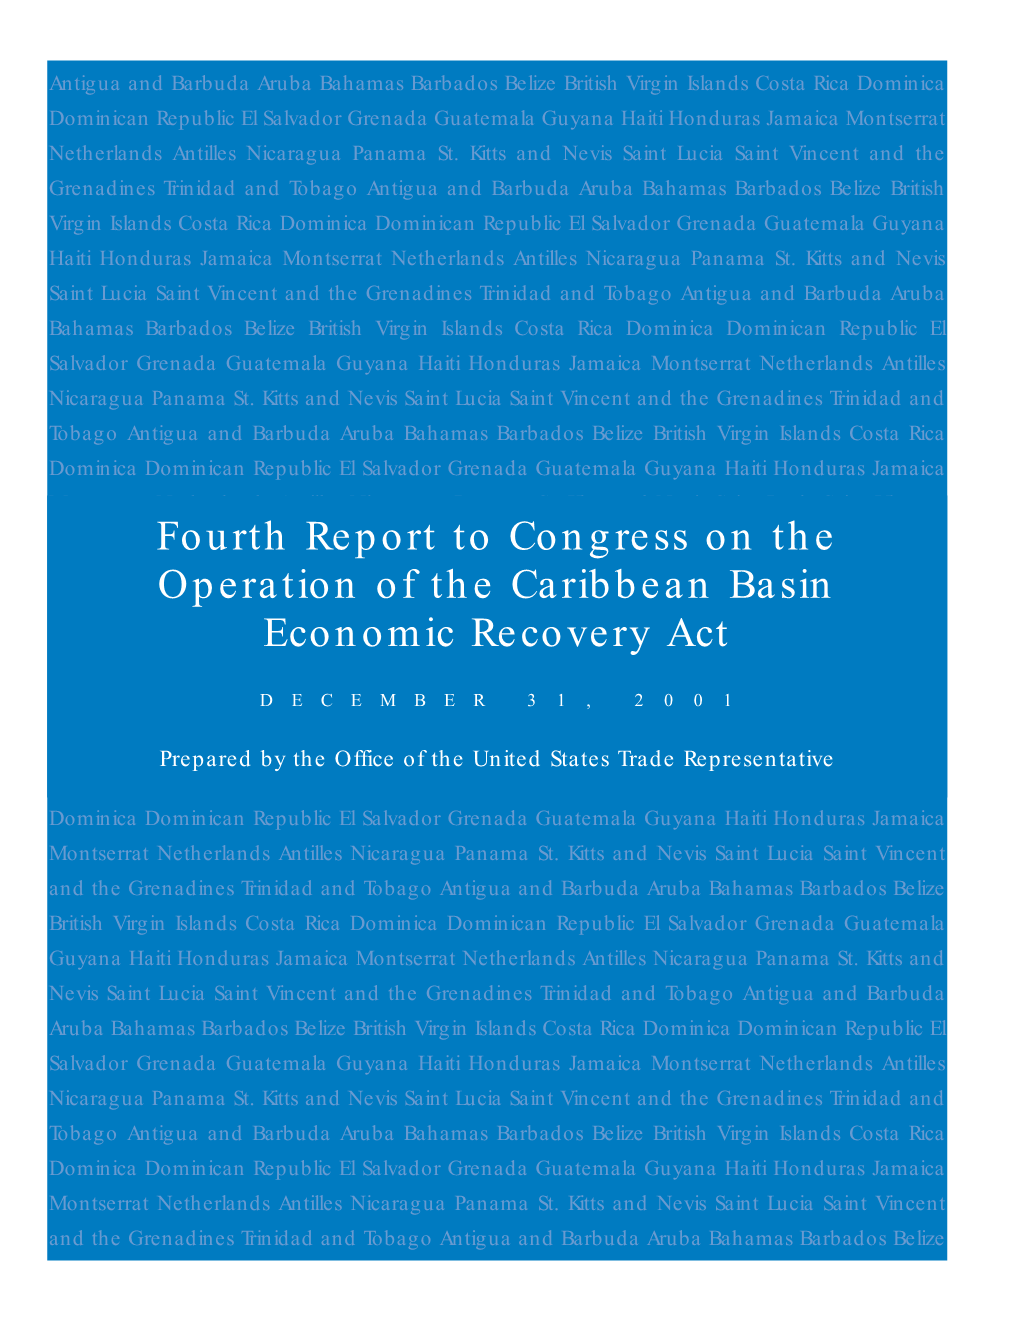 Fourth Report to Congress on the Operation of the Caribbean Basin Economic Recovery Act